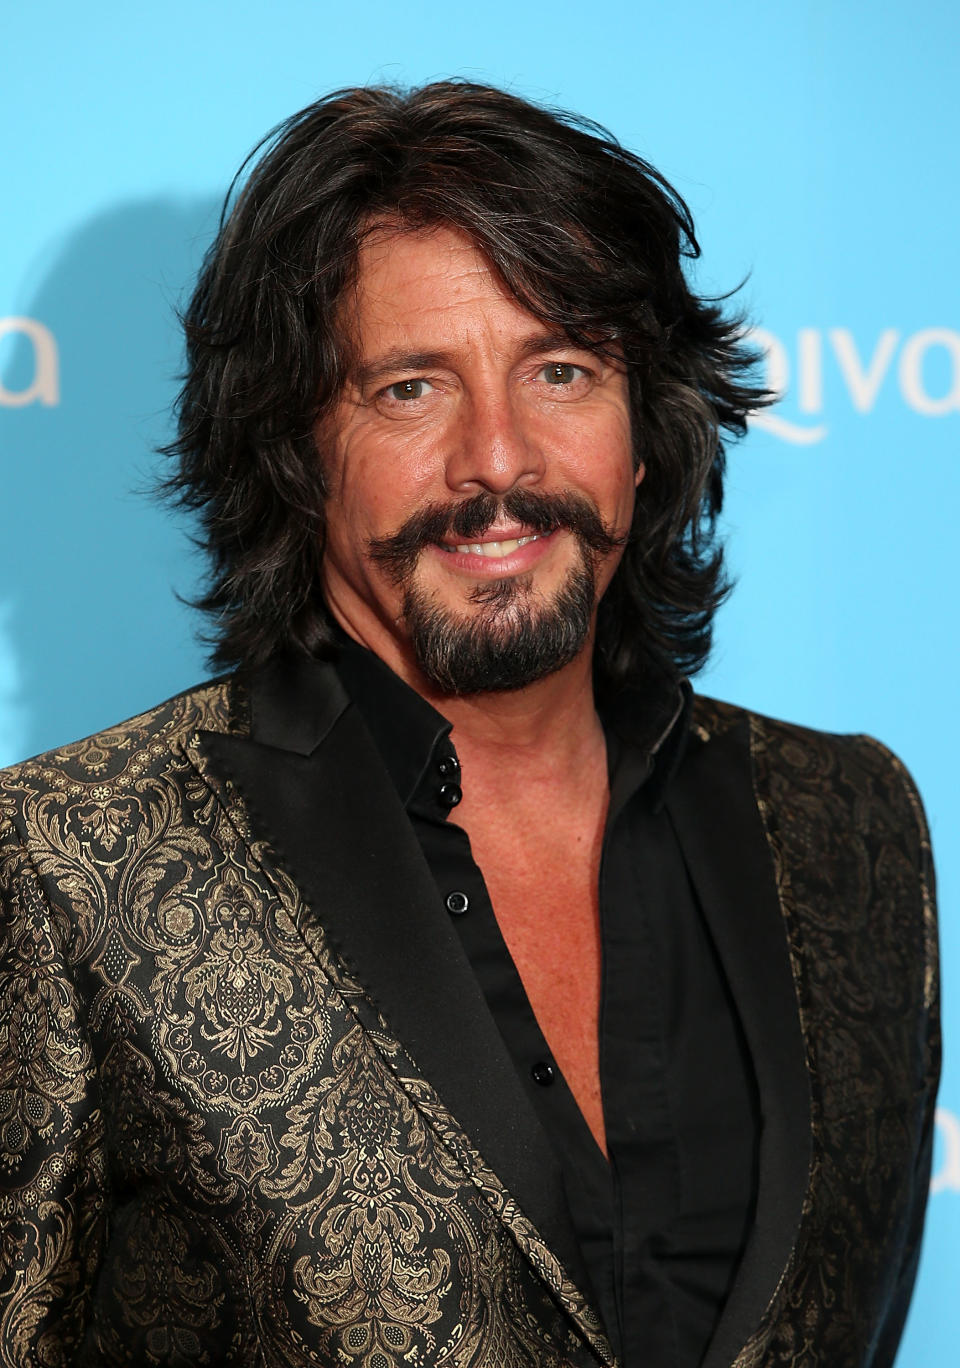 LONDON, ENGLAND - JULY 03:  Laurence  Llewelyn-Bowen attends the Arqiva Commercial Radio Awards at Westminster Bridge Park Plaza Hotel on July 3, 2014 in London, England.  (Photo by Danny Martindale/WireImage)